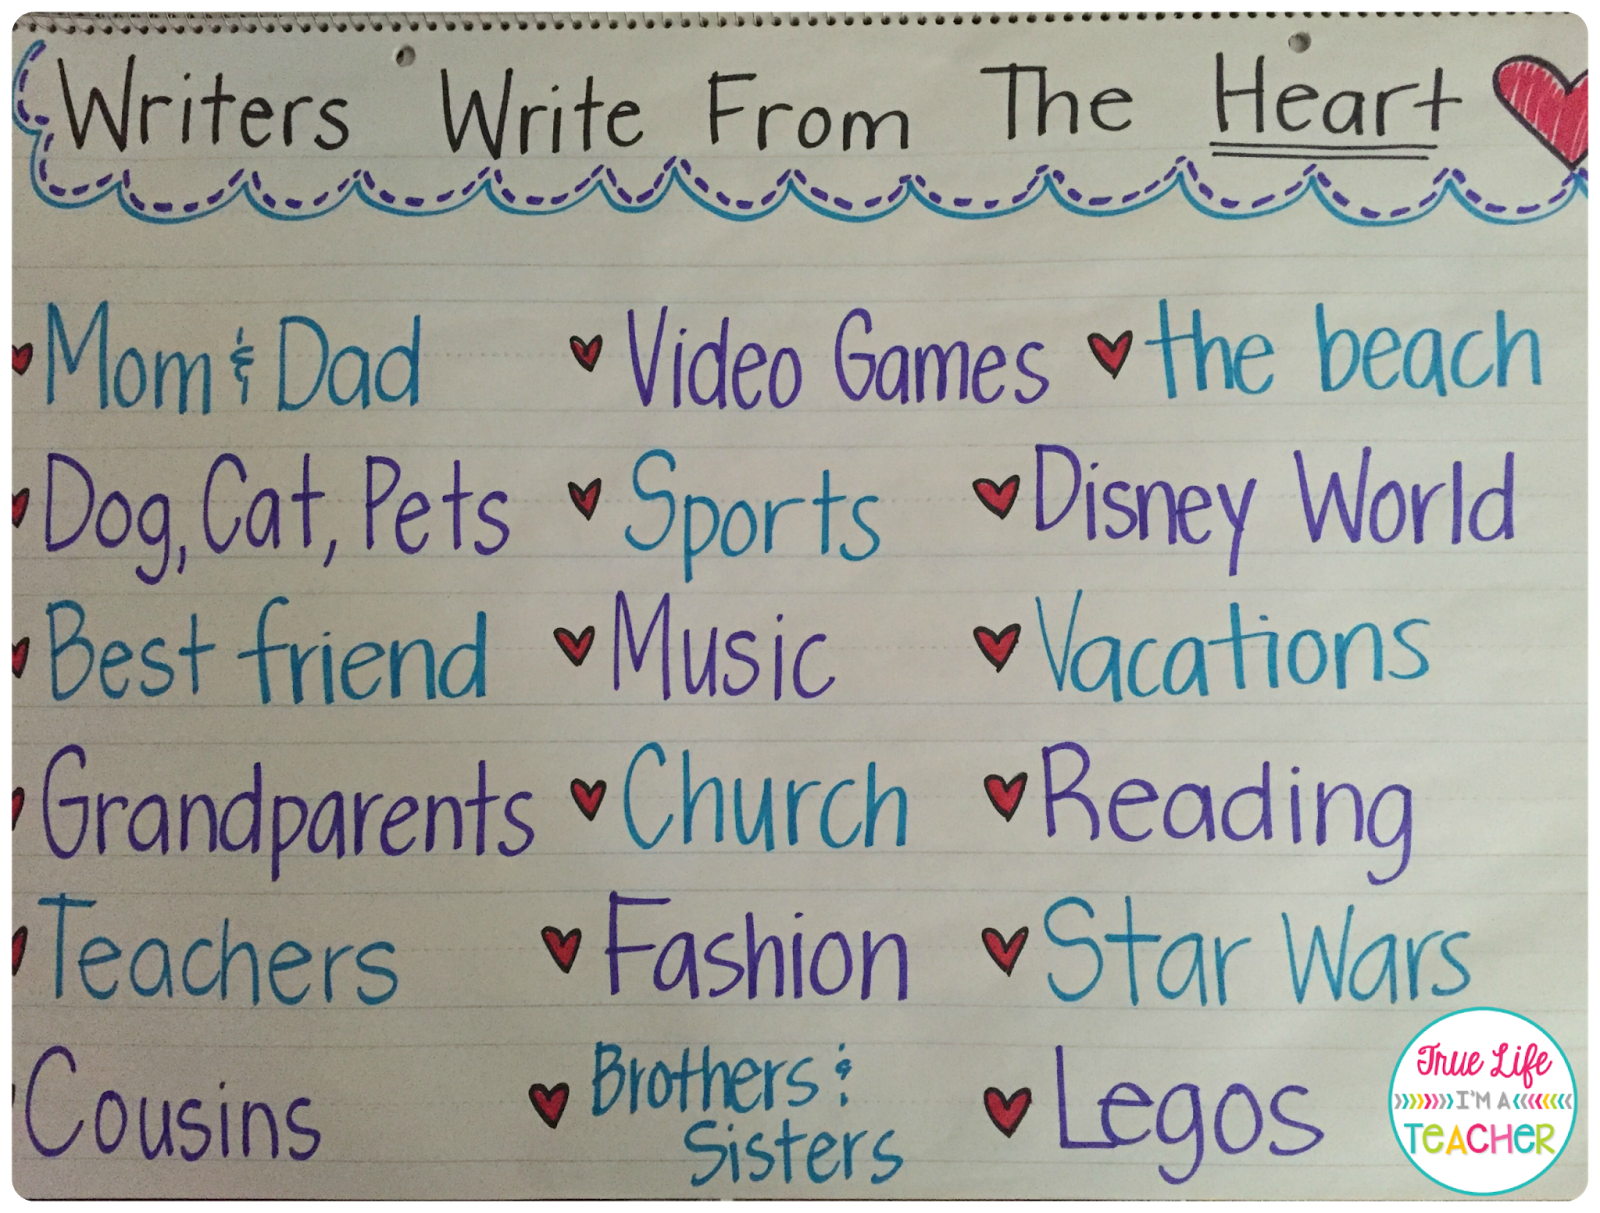 writer-s-workshop-writing-from-the-heart-true-life-i-m-a-teacher